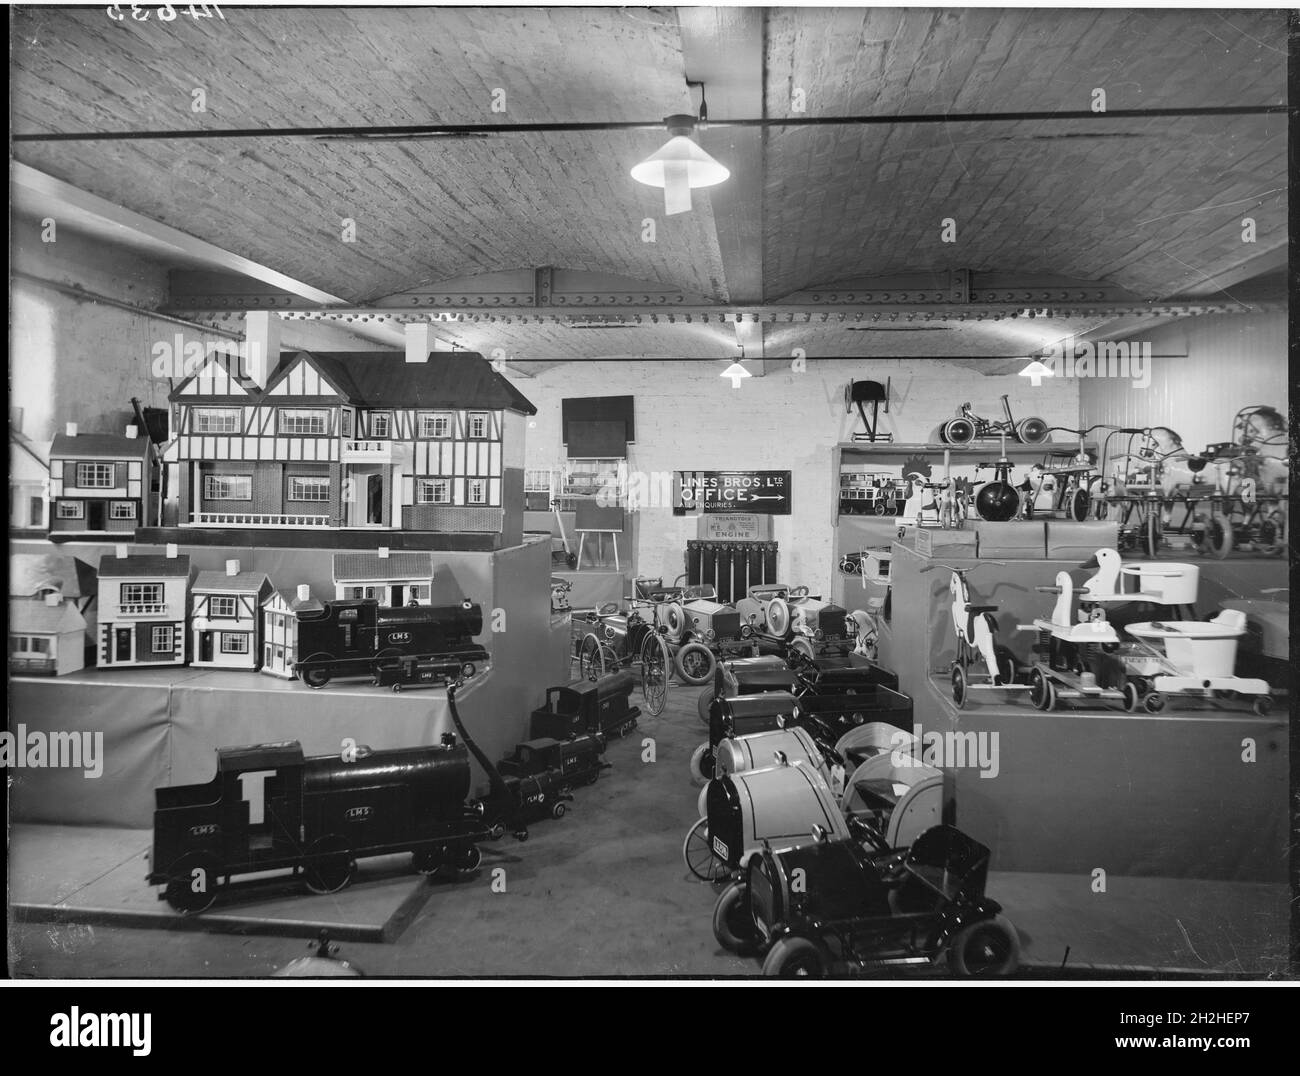 Werneth Goods Station, Middleton Road, Werneth, Oldham, 1927. A display of Triang toys including dolls houses, trains, pedal cars and tricycles. The toys displayed here were manufactured by Lines Bros Ltd under the Triang brand. The photograph was probably taken in a warehouse at Werneth Goods Station where Lines Bros Ltd had their northern depot. Stock Photo